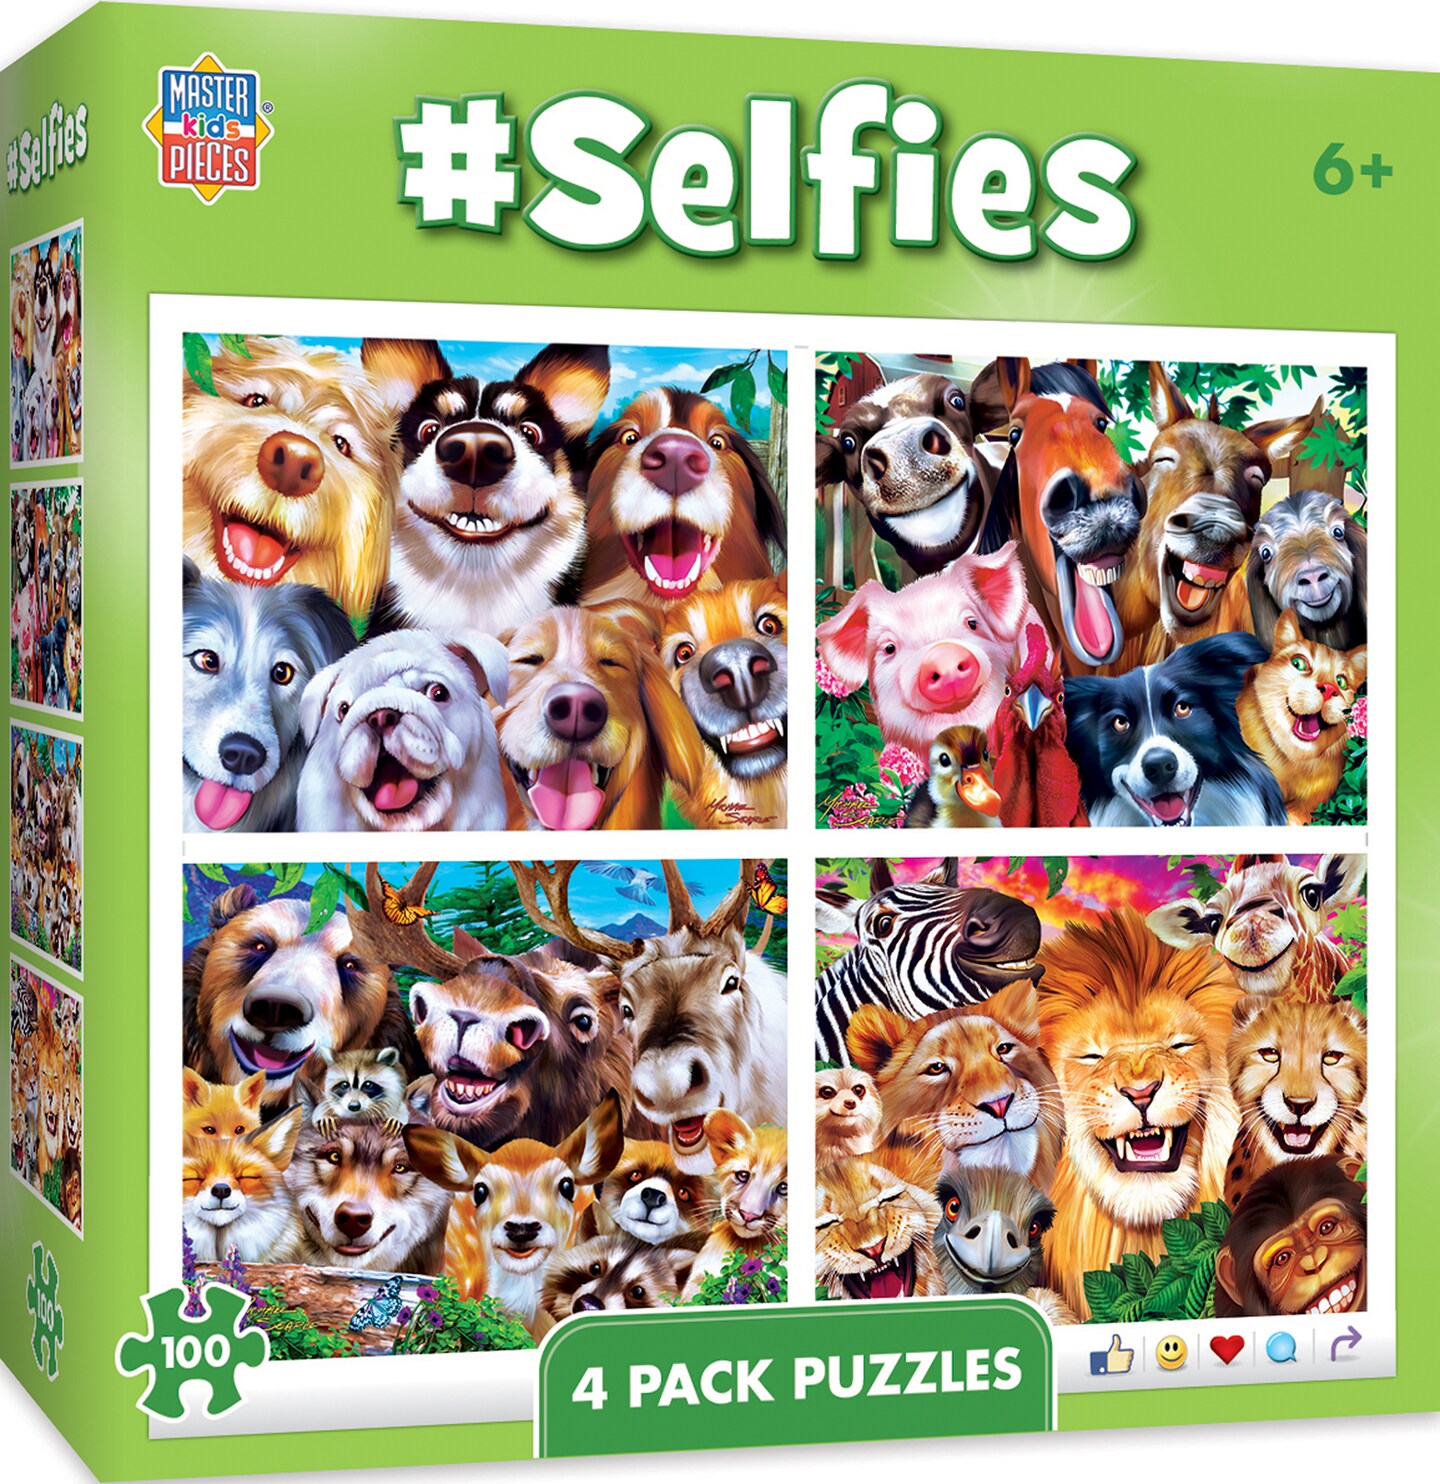 MasterPieces Puzzle Set - 4-Pack 100 Piece Jigsaw Puzzle for Kids - Selfies  4-Pack - 8x10